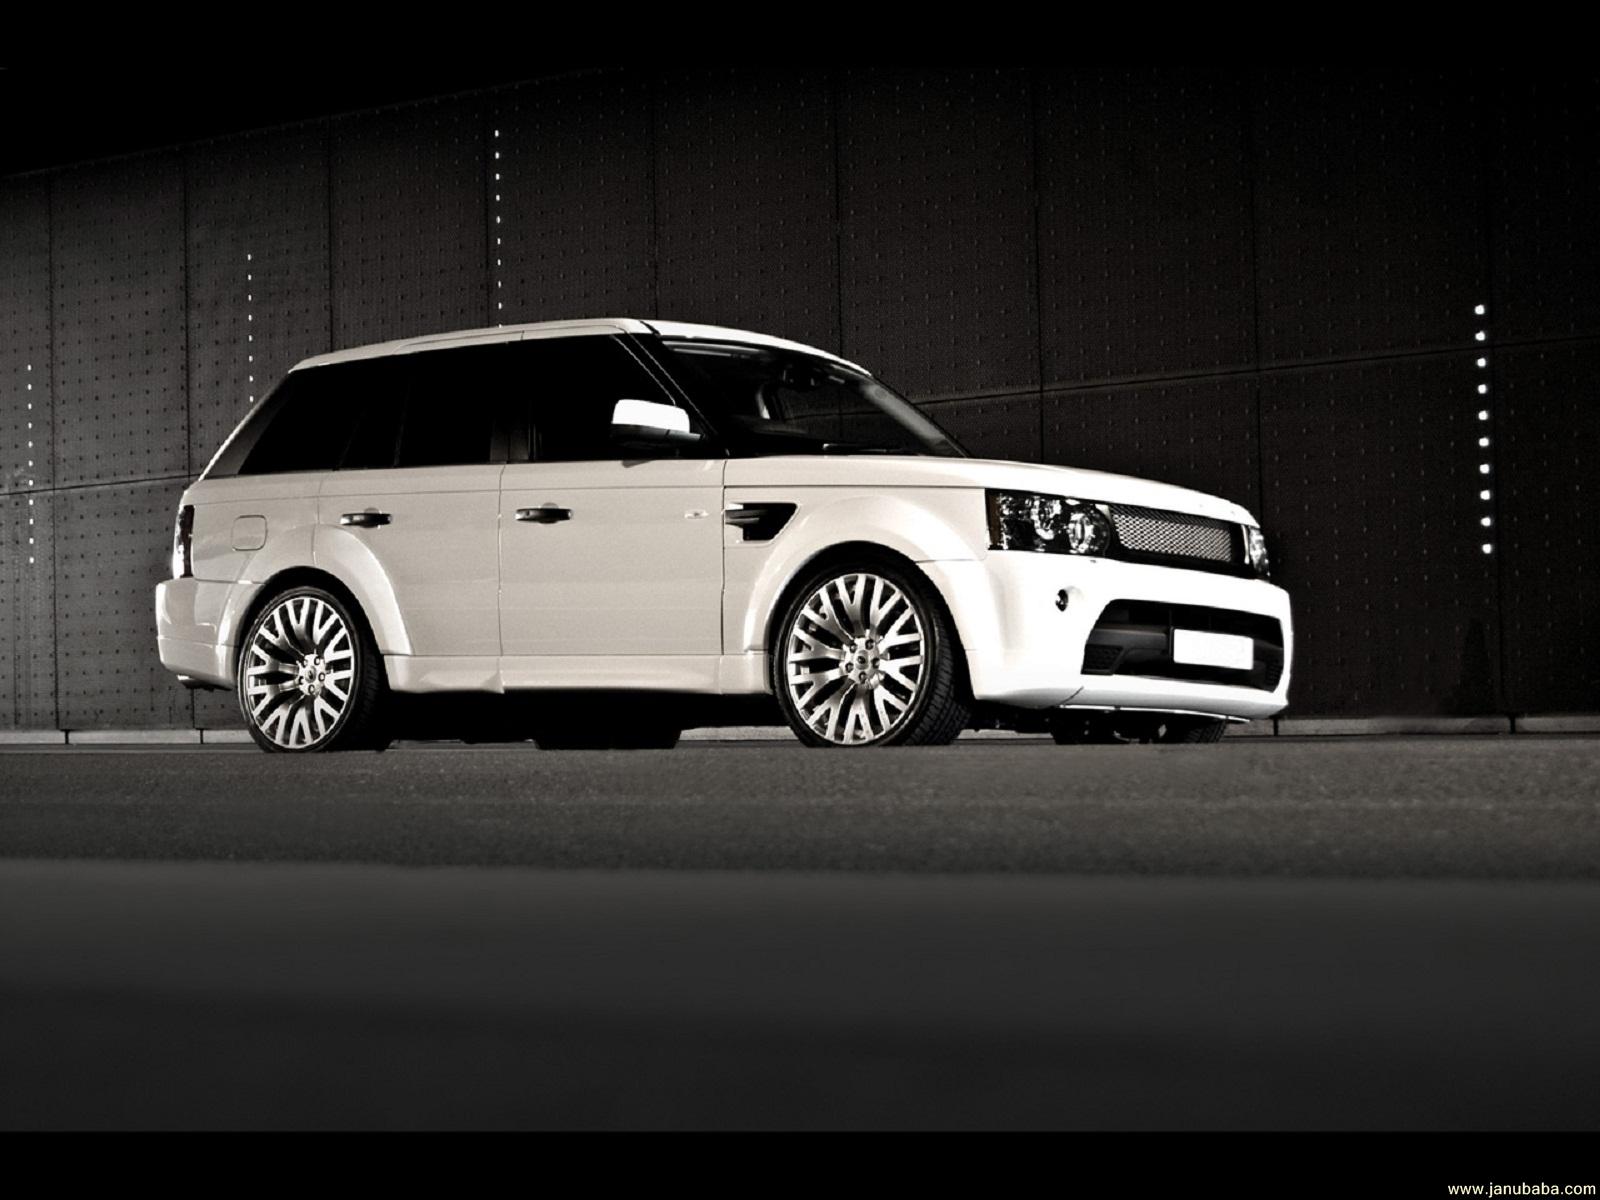 2010 Project Kahn Range Rover Sport RS600 by cheema wallpaper